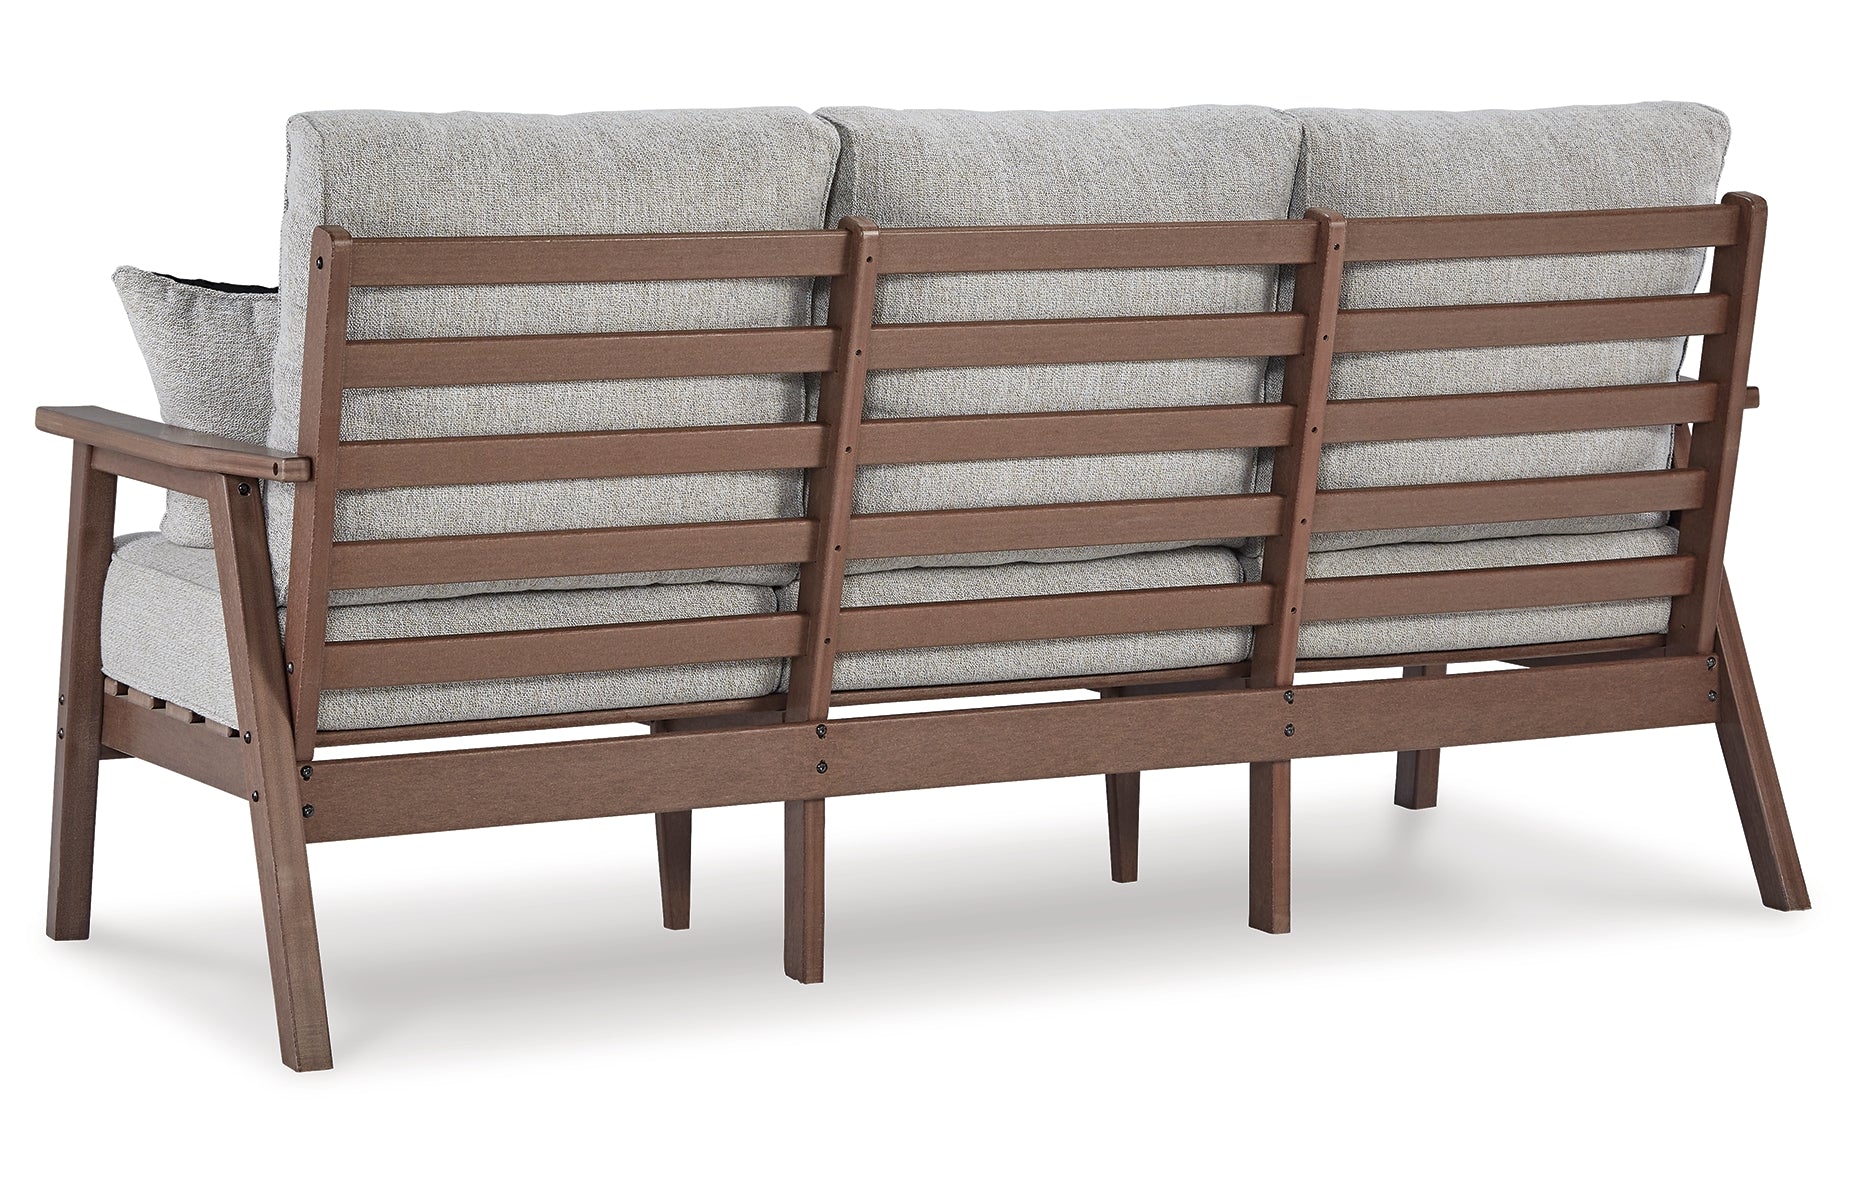 Emmeline Outdoor Sofa, Loveseat and 2 Lounge Chairs with Coffee Table and 2 End Tables